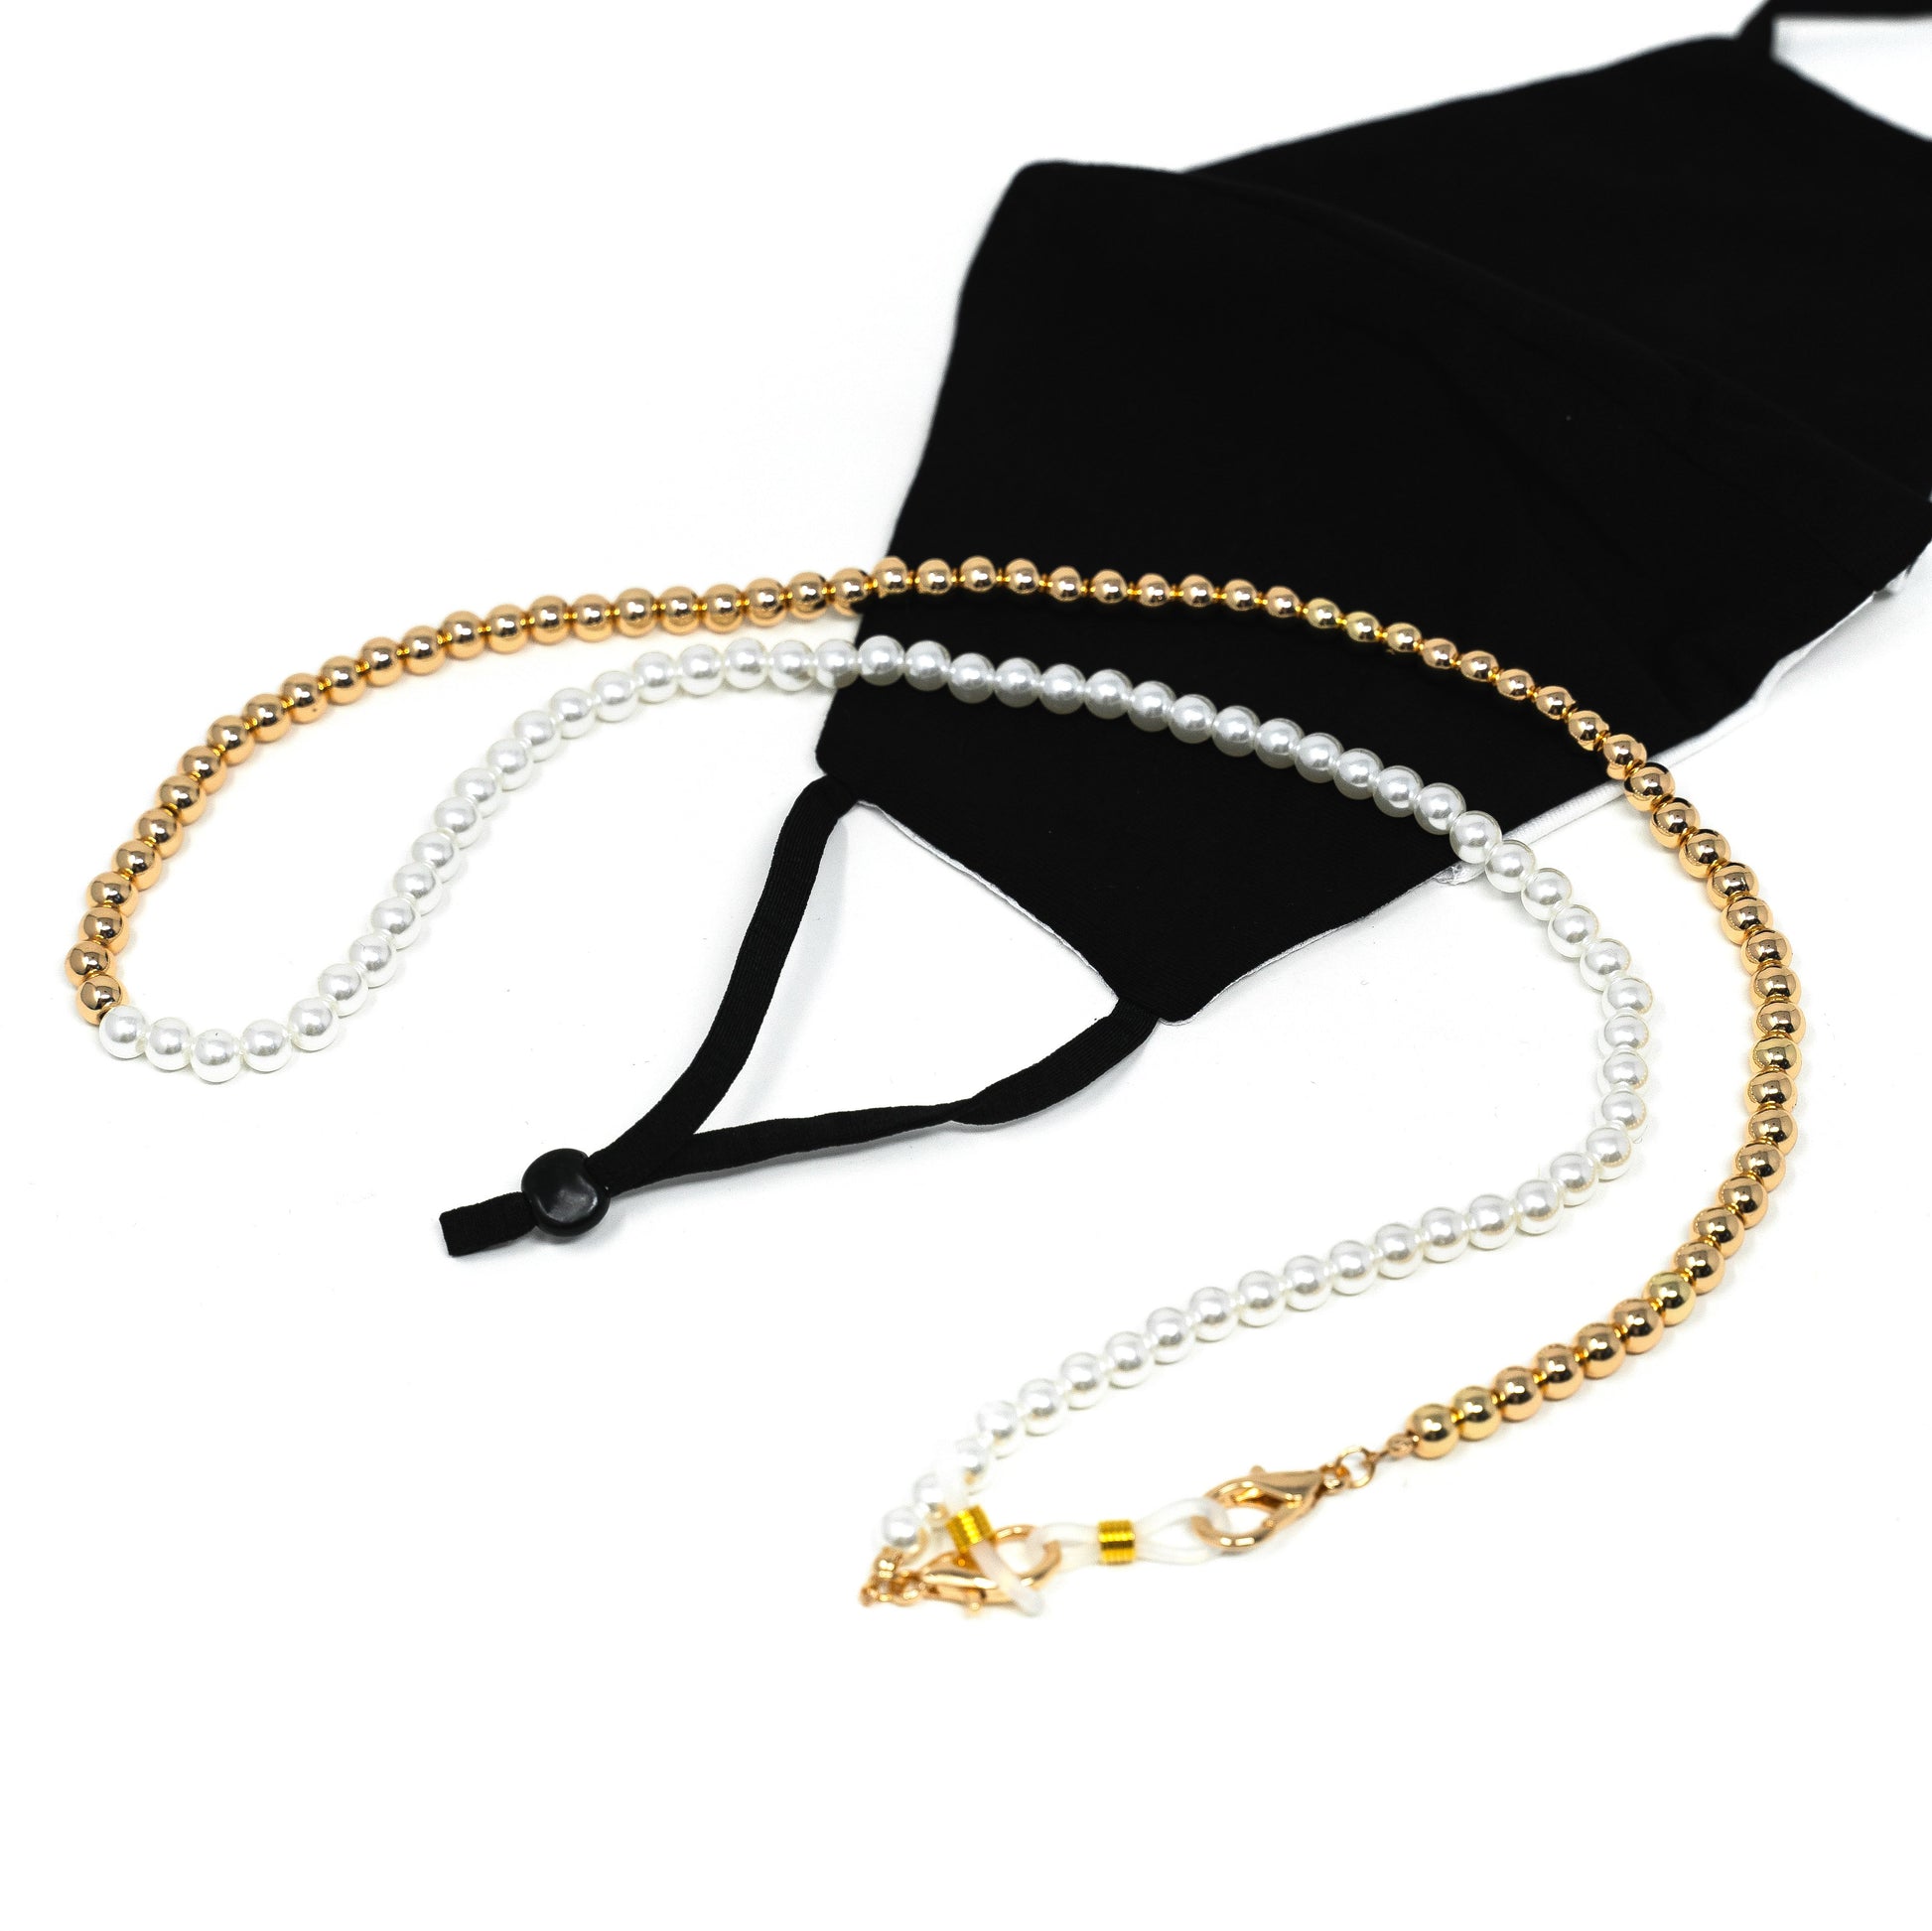 Save Your Mask - Sis Kiss Mask Chains ACCESSORY The Sis Kiss Gold and Pearl Beads